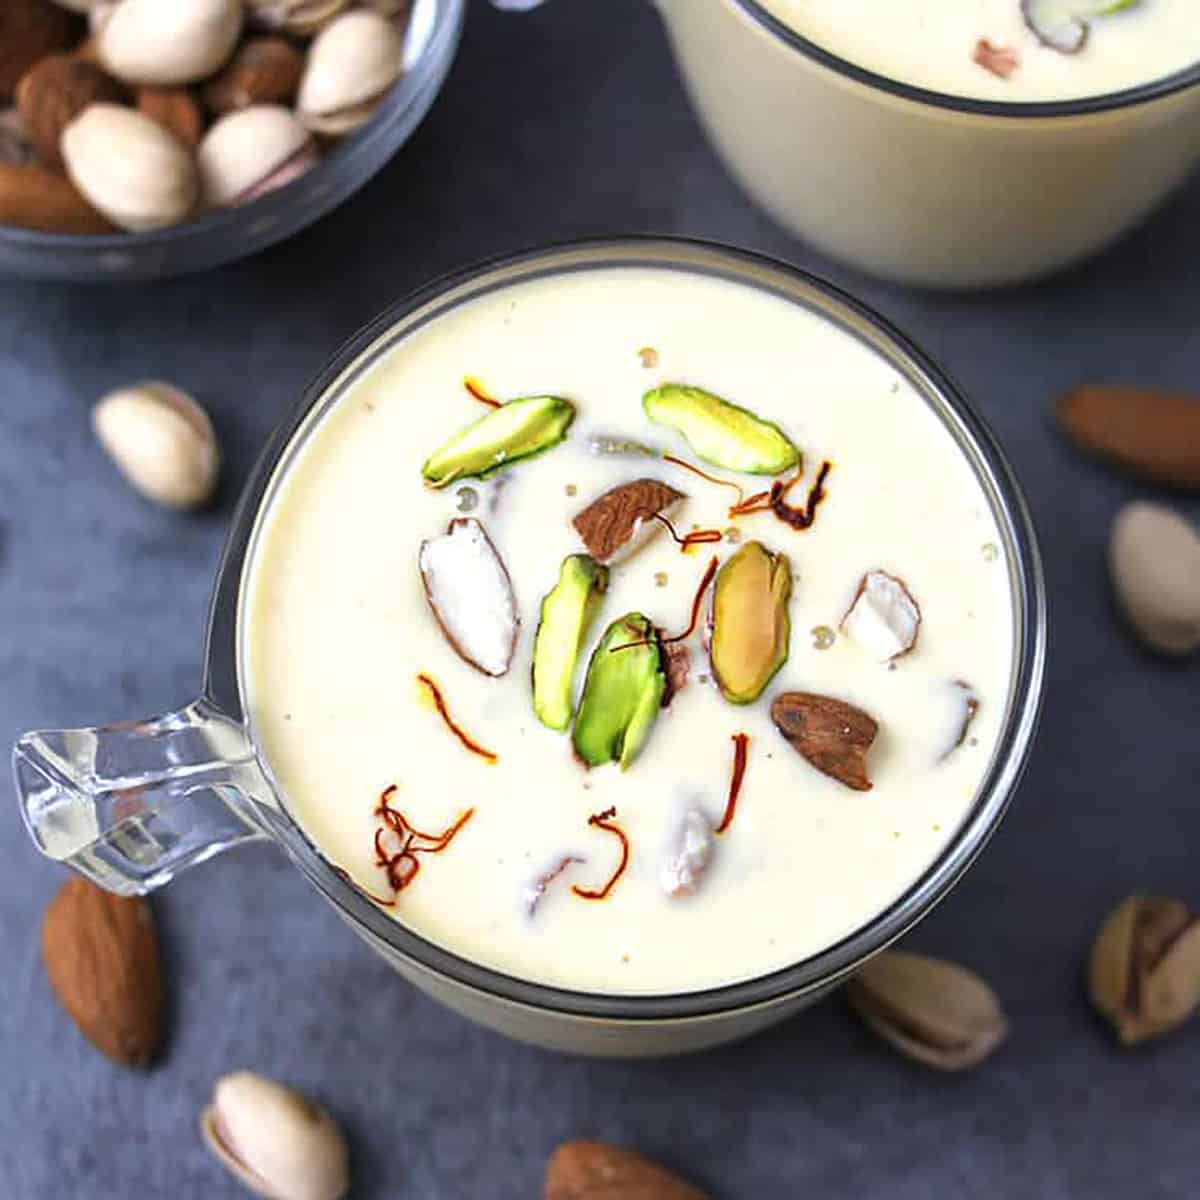 Basundi sweet - Best, quick and easy Indian milk dessert garnished with nuts, kesar. 